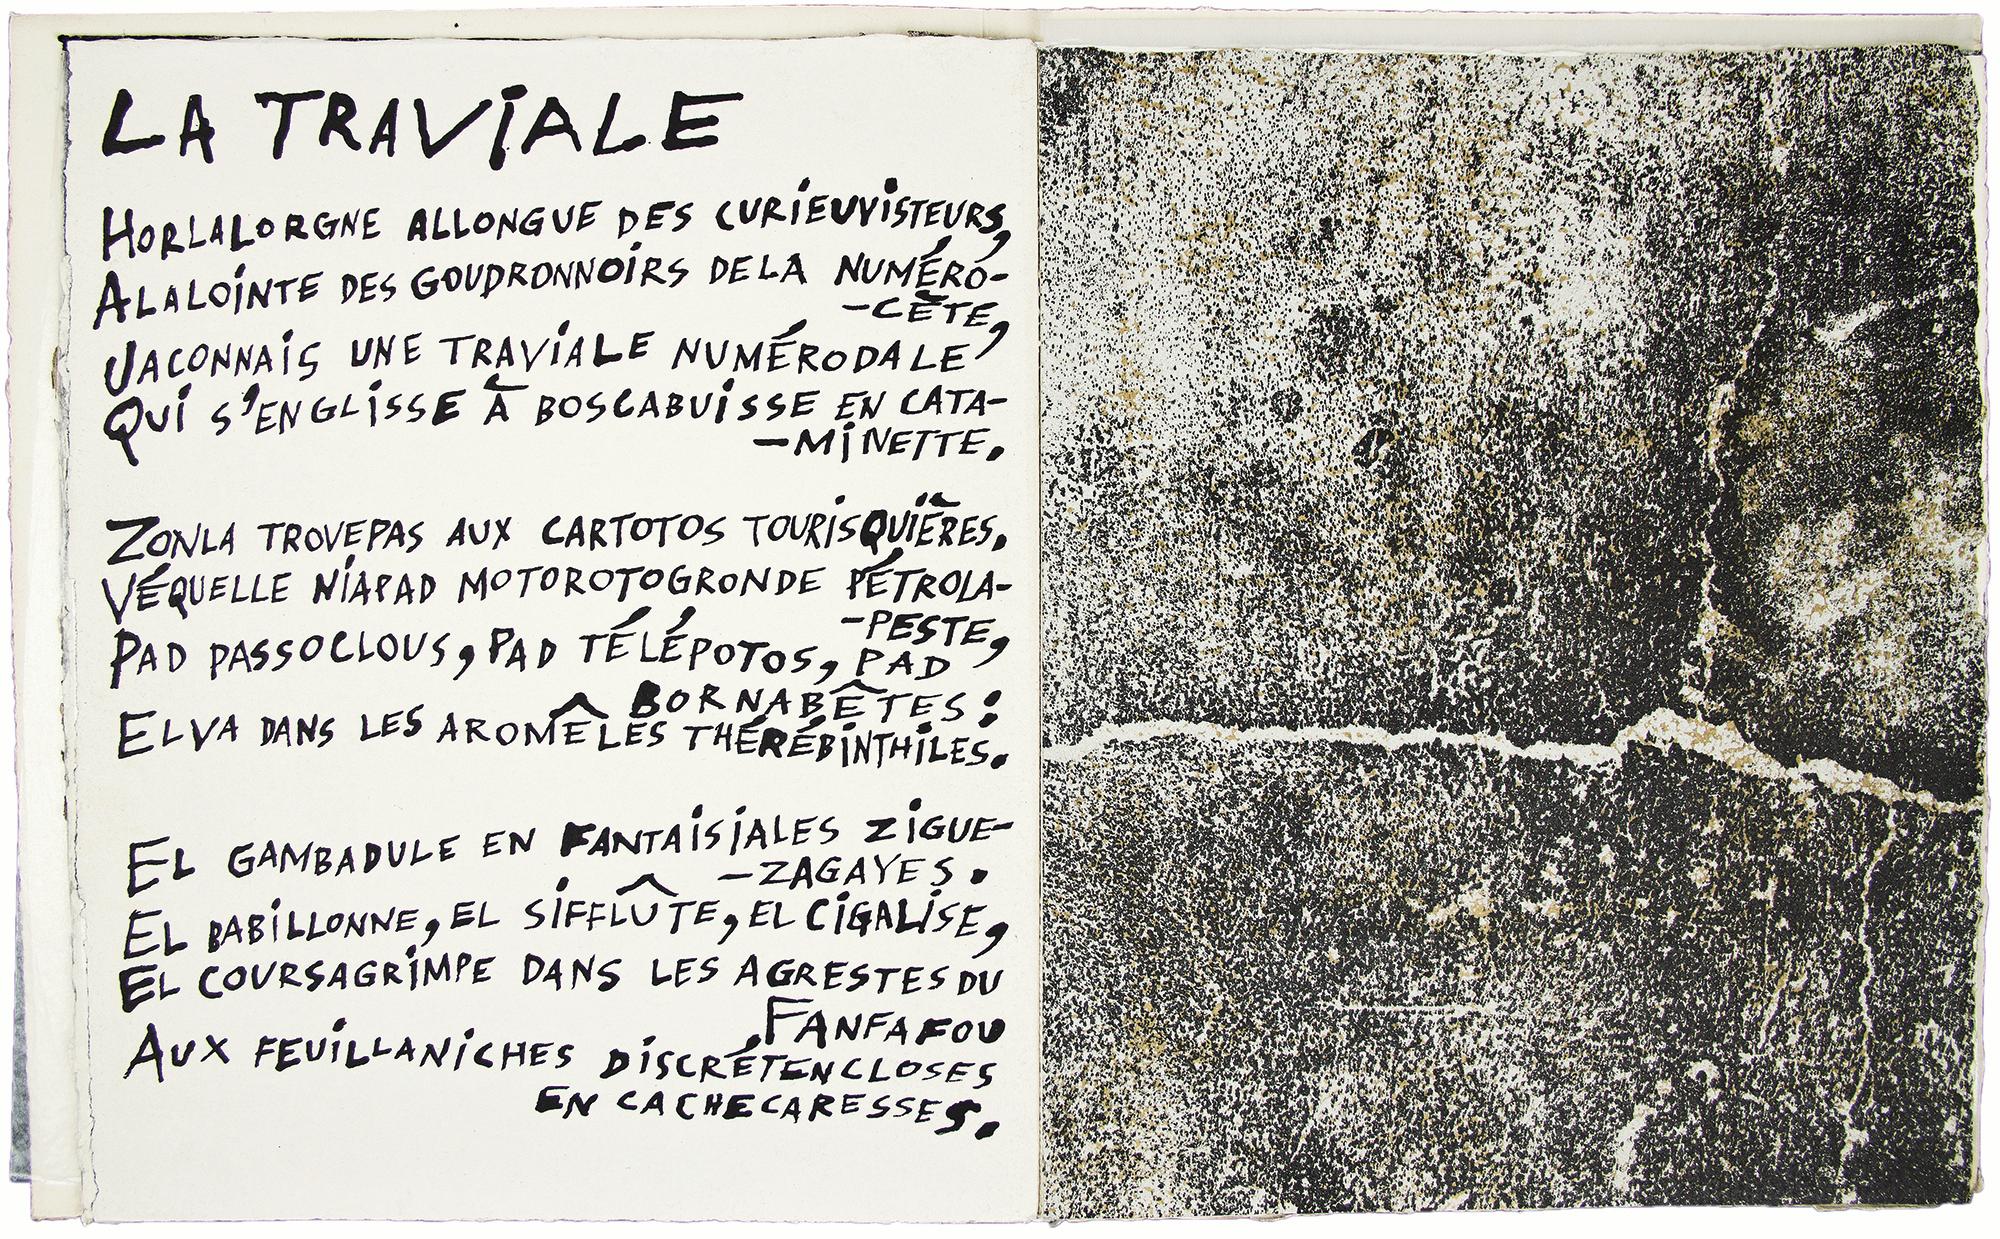 DUBUFFET, Jean.  Le Mirivis des Naturgies.  By André Martel and Jean Dubuffet.  48 pp.  Illustrated with 16 original lithographs by Dubuffet, of which 14 are loose, one is on the wrappers and one on the slipcase.  4to., 290 x 230 mm, bound in